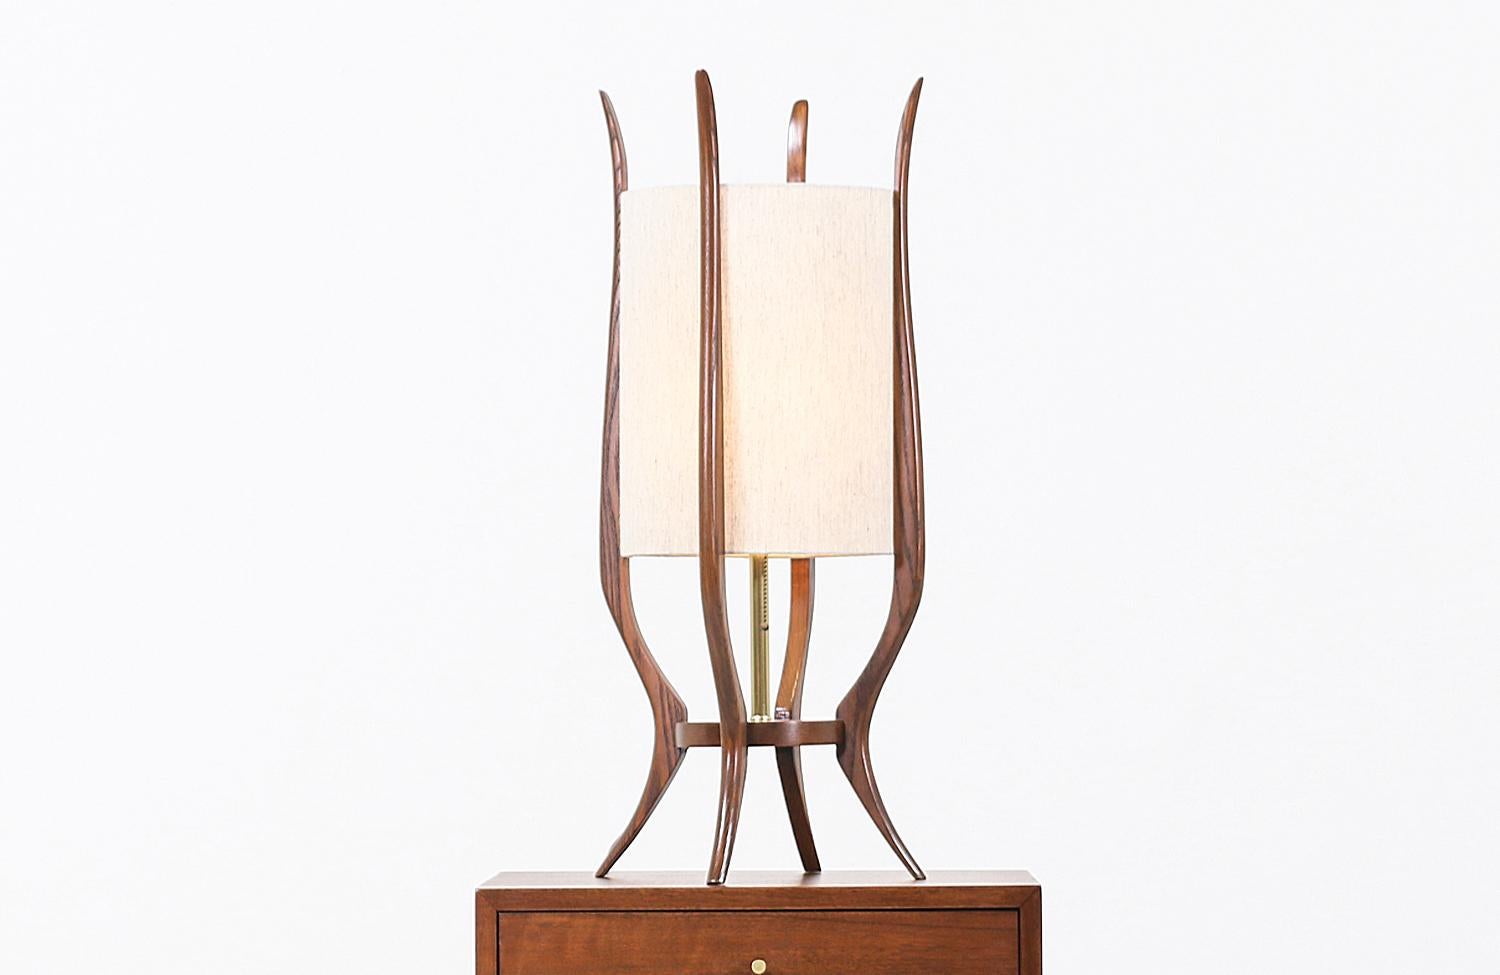 Stylish modern table lamp designed and manufactured by Modeline of California in the United States circa 1960s. This beautiful and sculptural table lamp features an asymmetric walnut wood body with four slim prongs and elegant polished brass